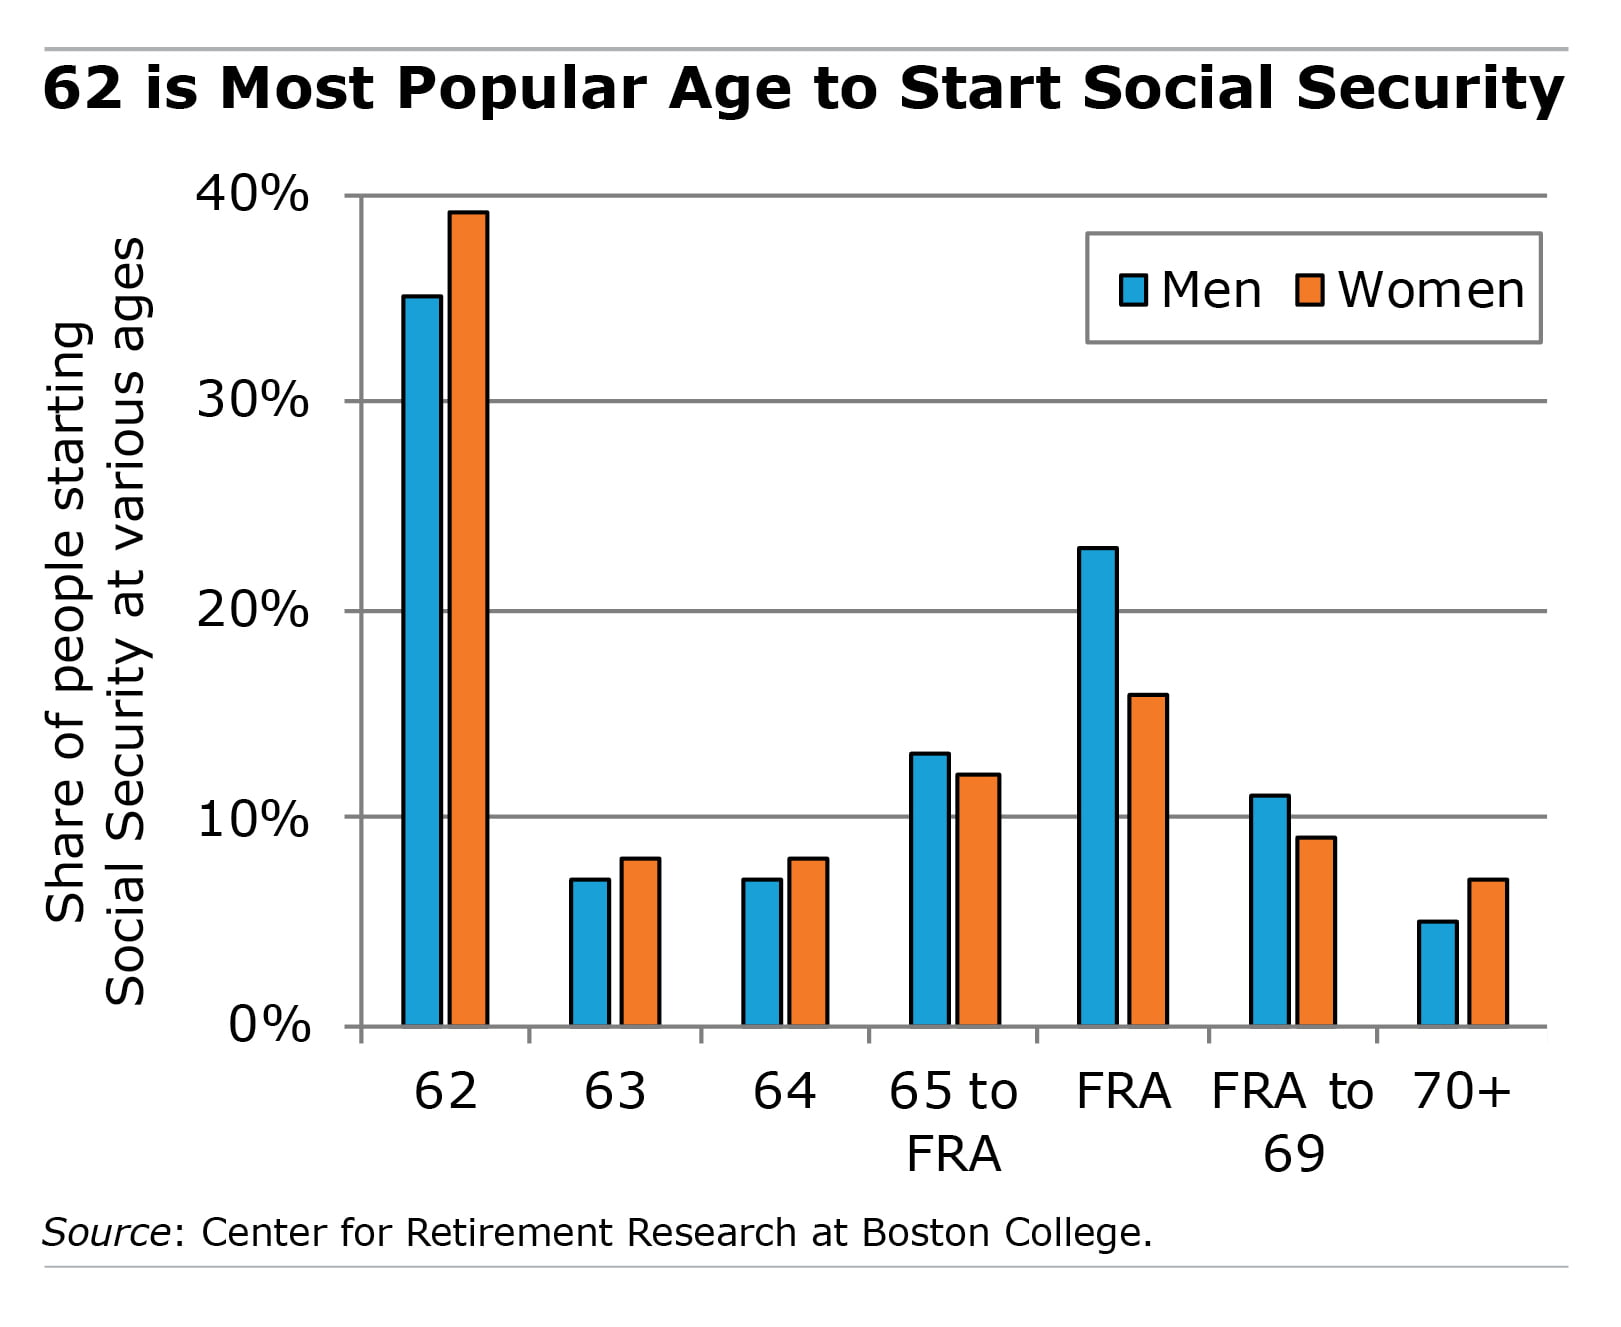 Bar graph showing Social Security claiming ages